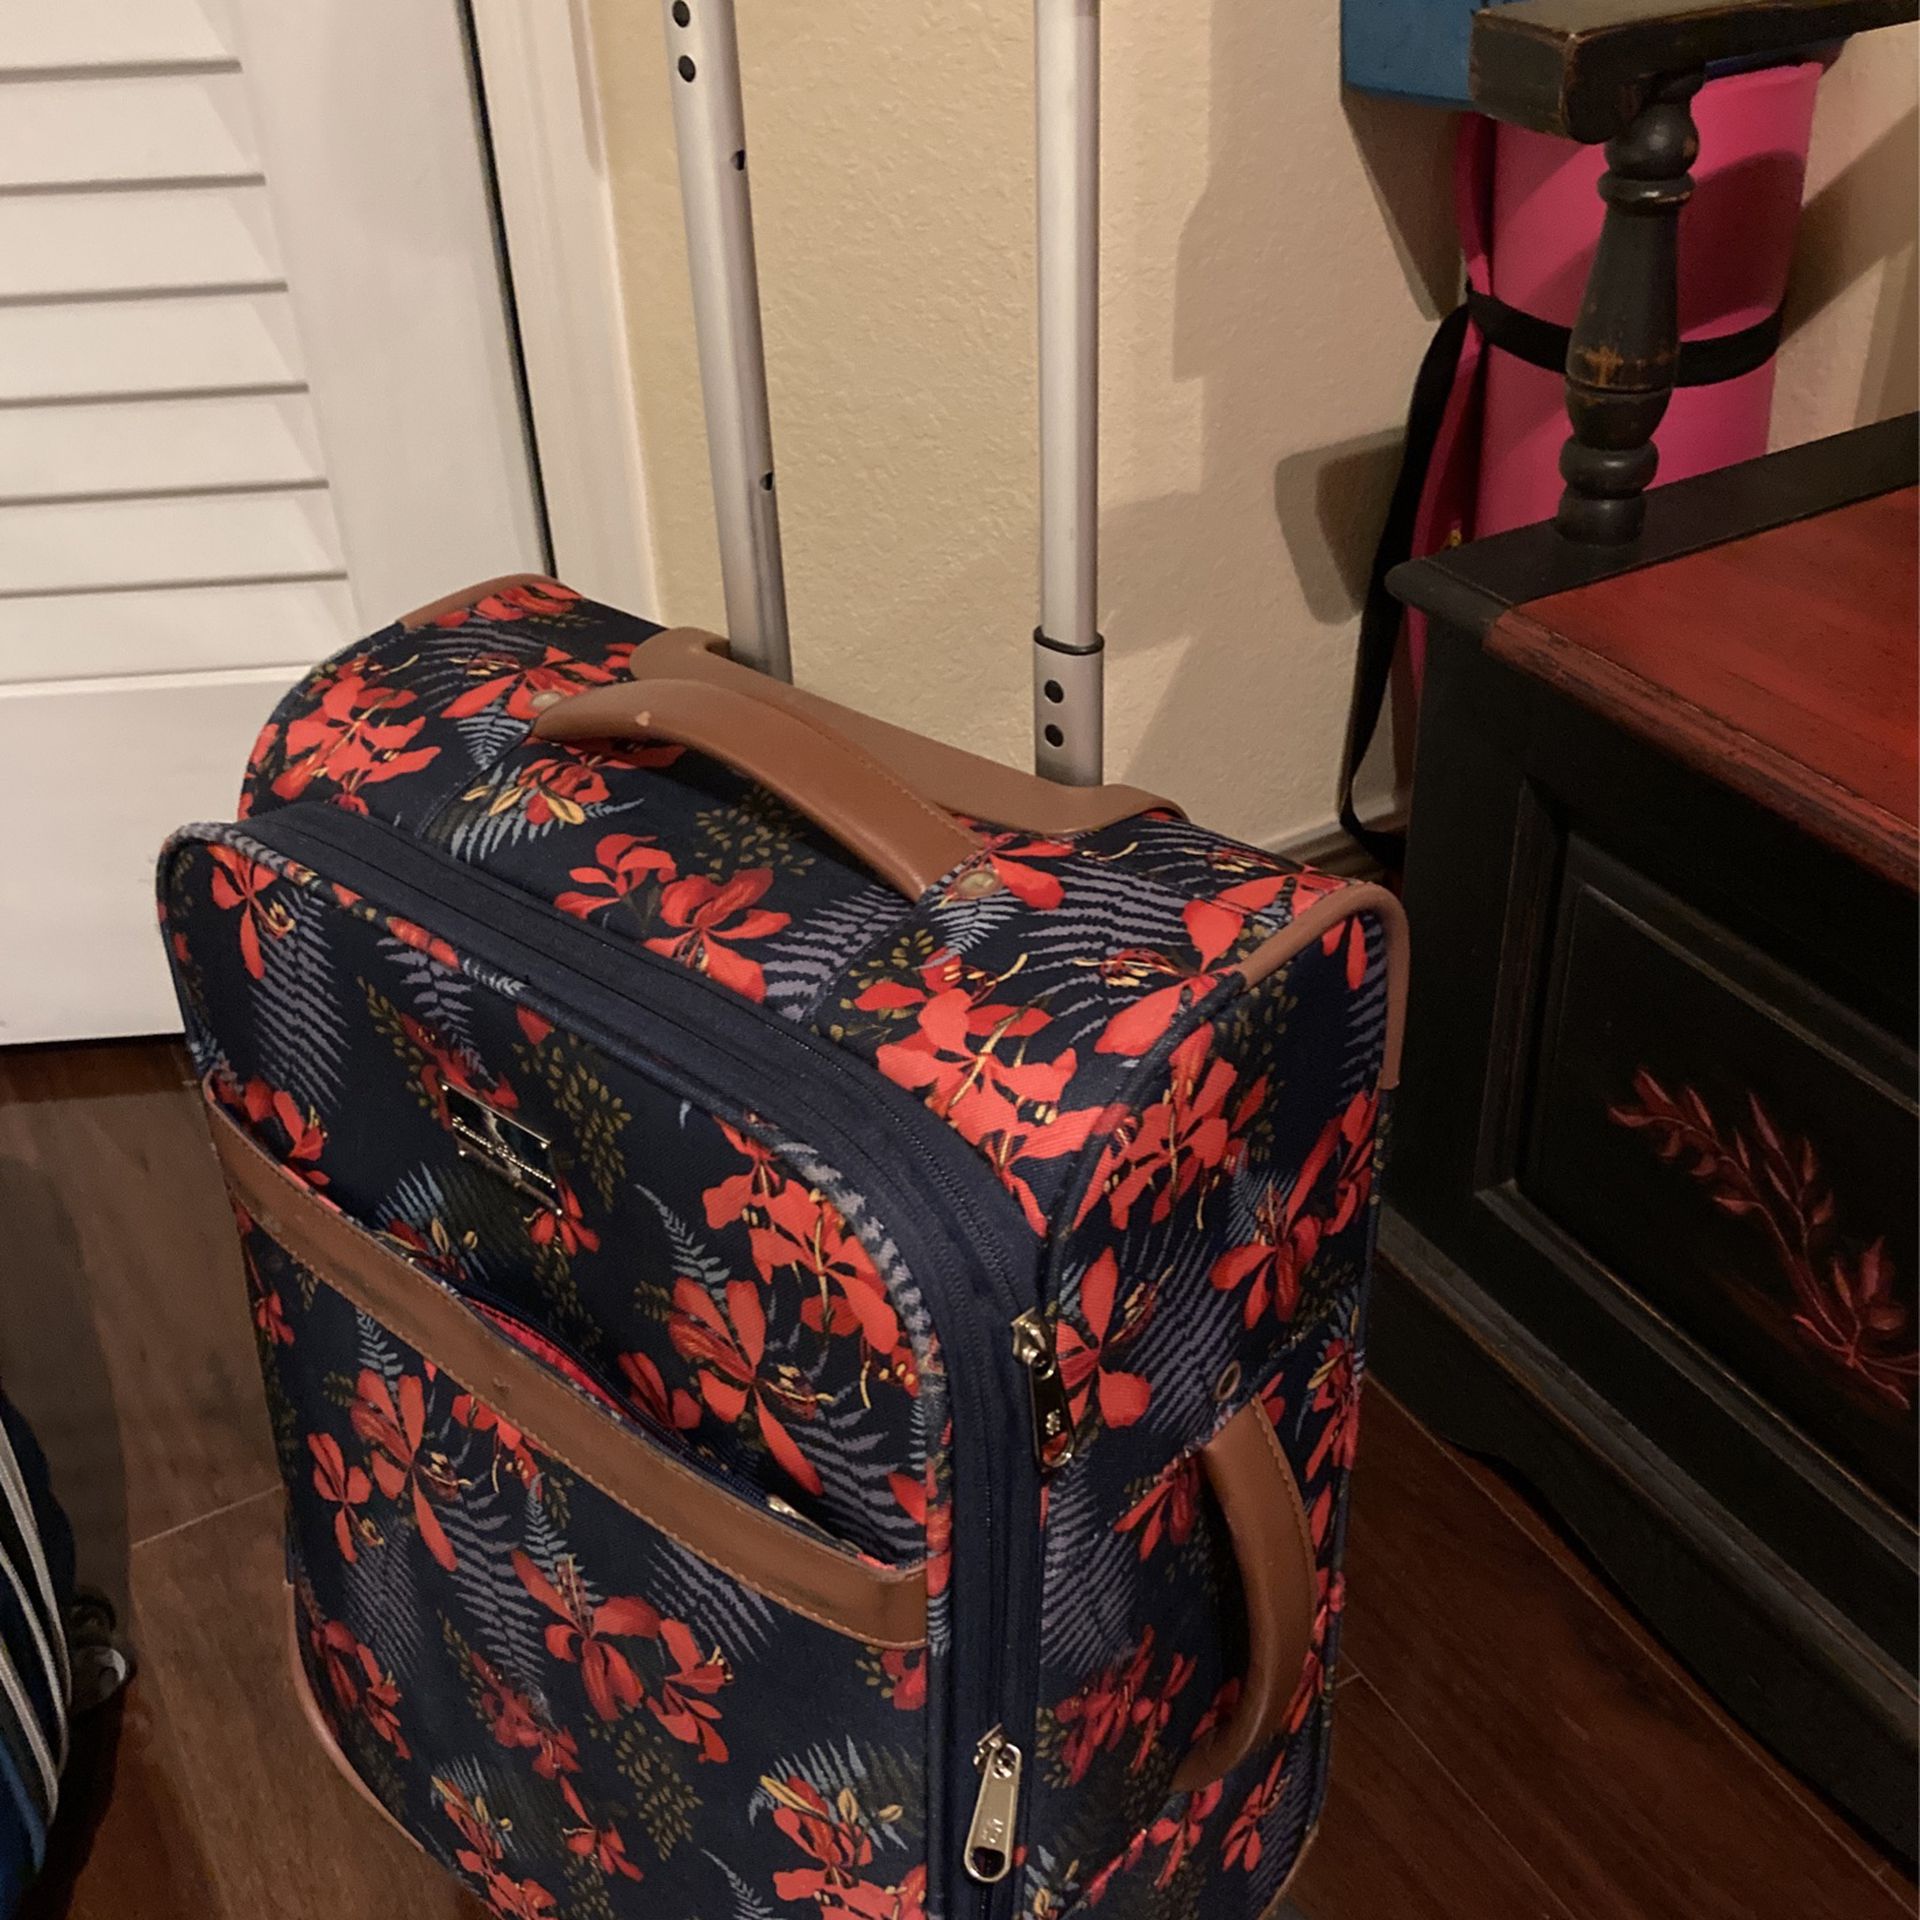 Christian Dior Vintage Luggage Set Suitcase Carry On for Sale in St.  Petersburg, FL - OfferUp